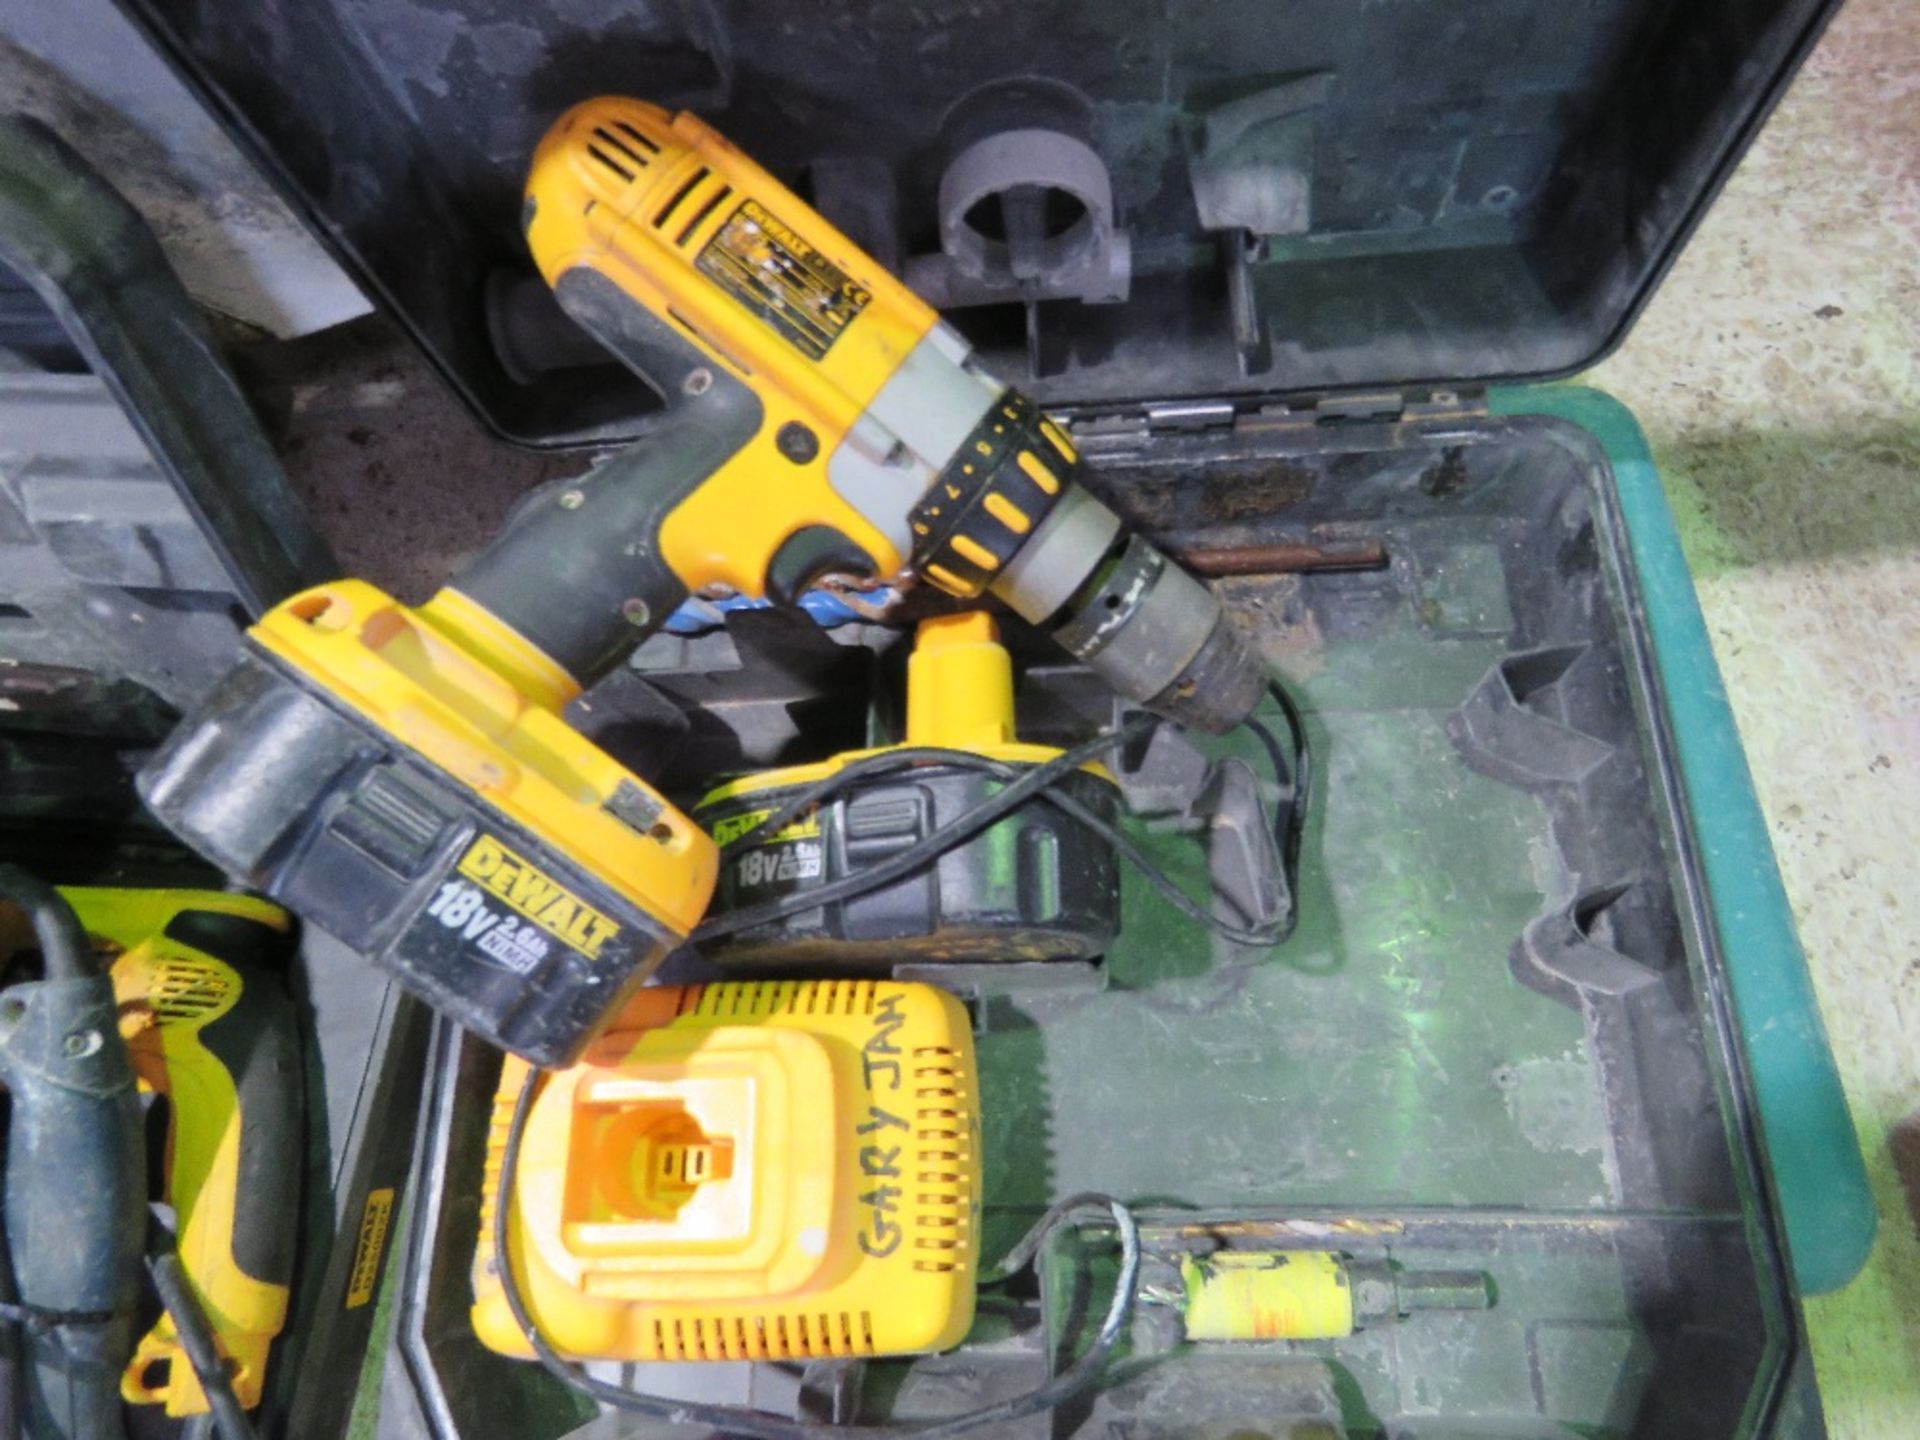 MAKITA BATTERY JIGSAW BODY PLUS A DEWALT BATTERY DRILL. DIRECT FROM LOCAL COMPANY. - Image 2 of 4